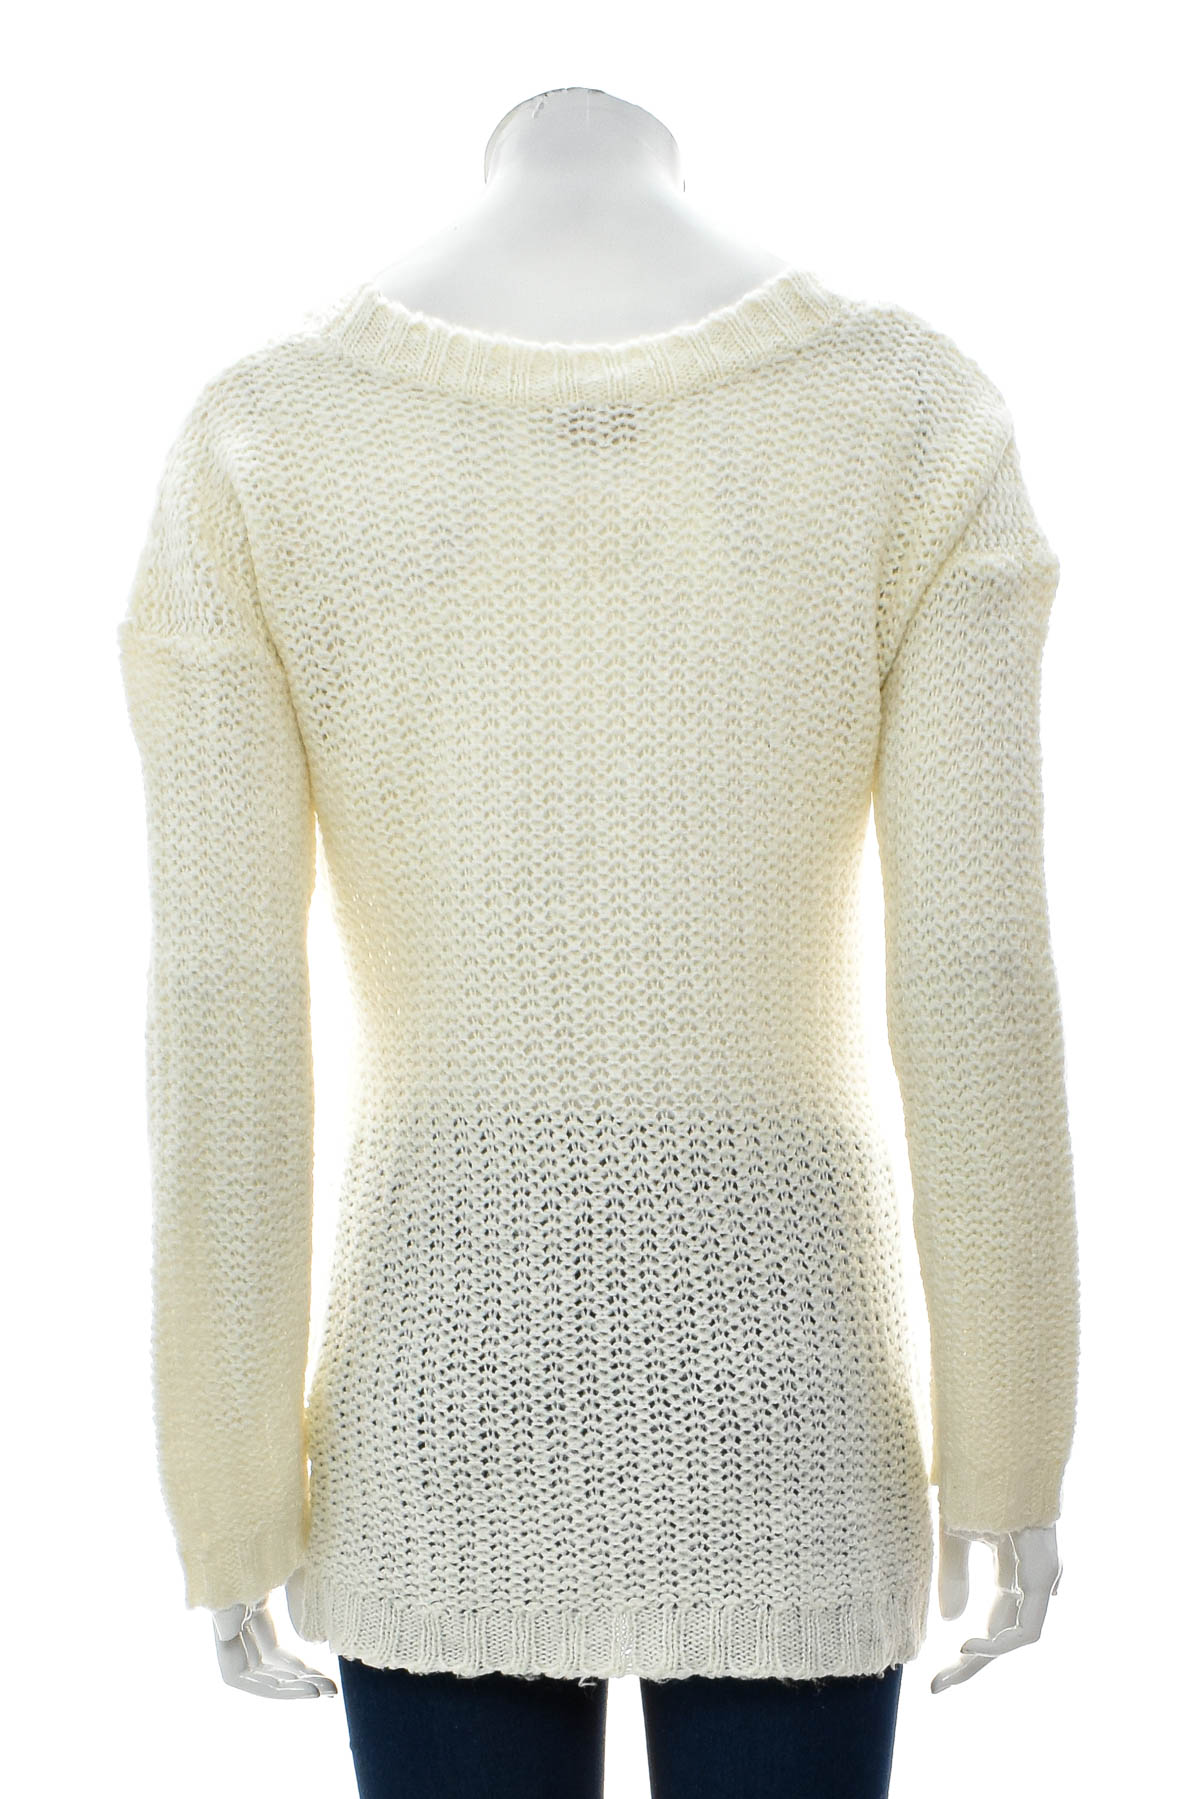 Women's sweater - Casual clothing - 1